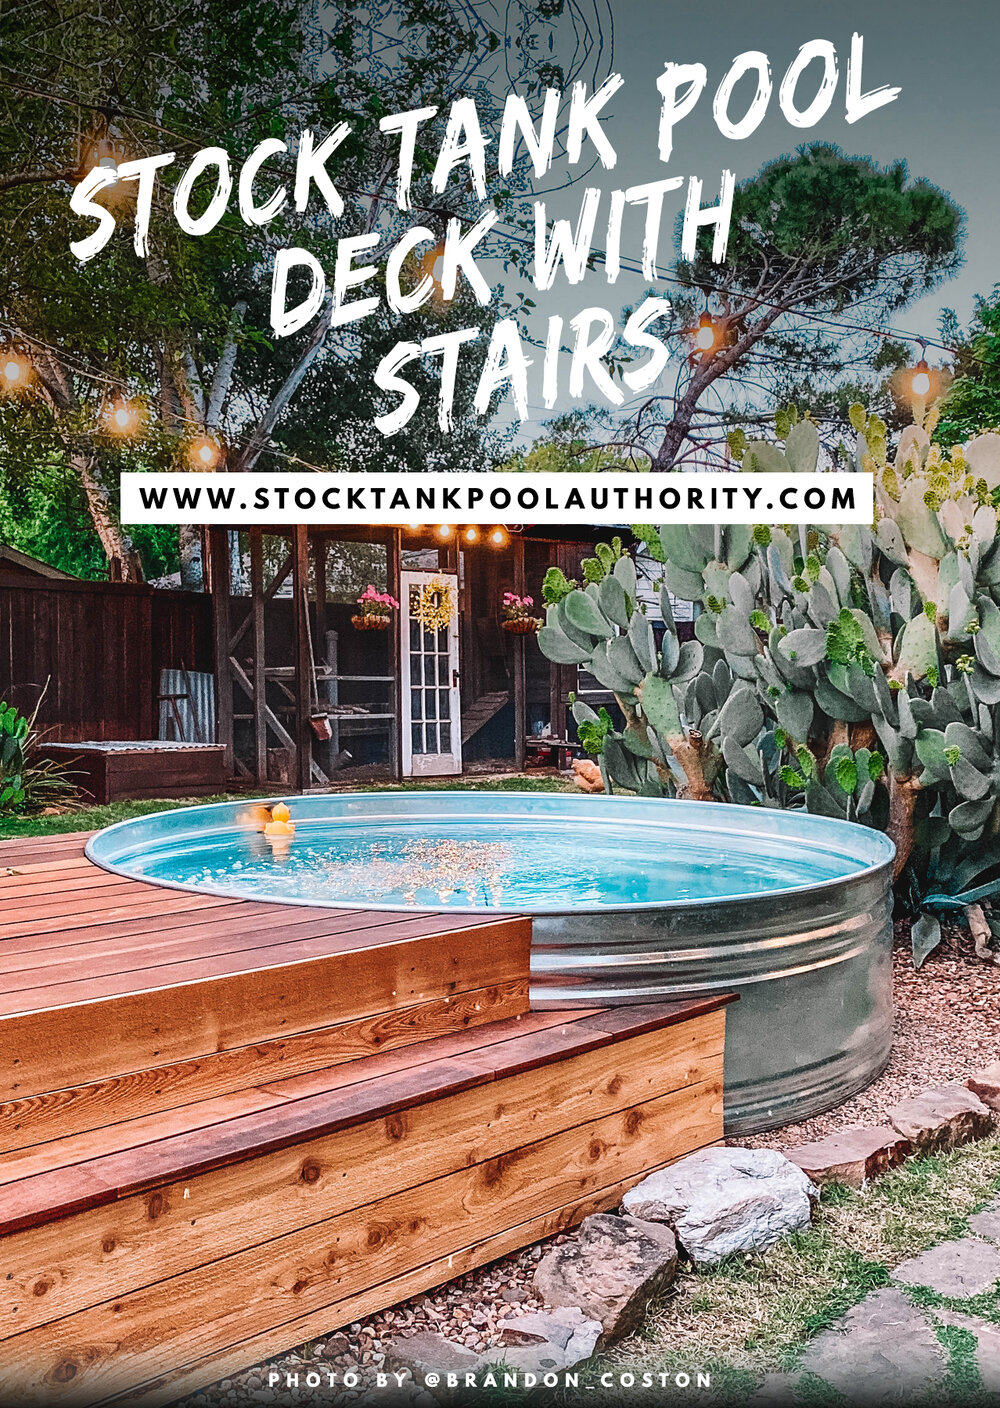 Stock Tank Pool Authority Pinterest Stock Tank Pool Deck With Stairs.jpg